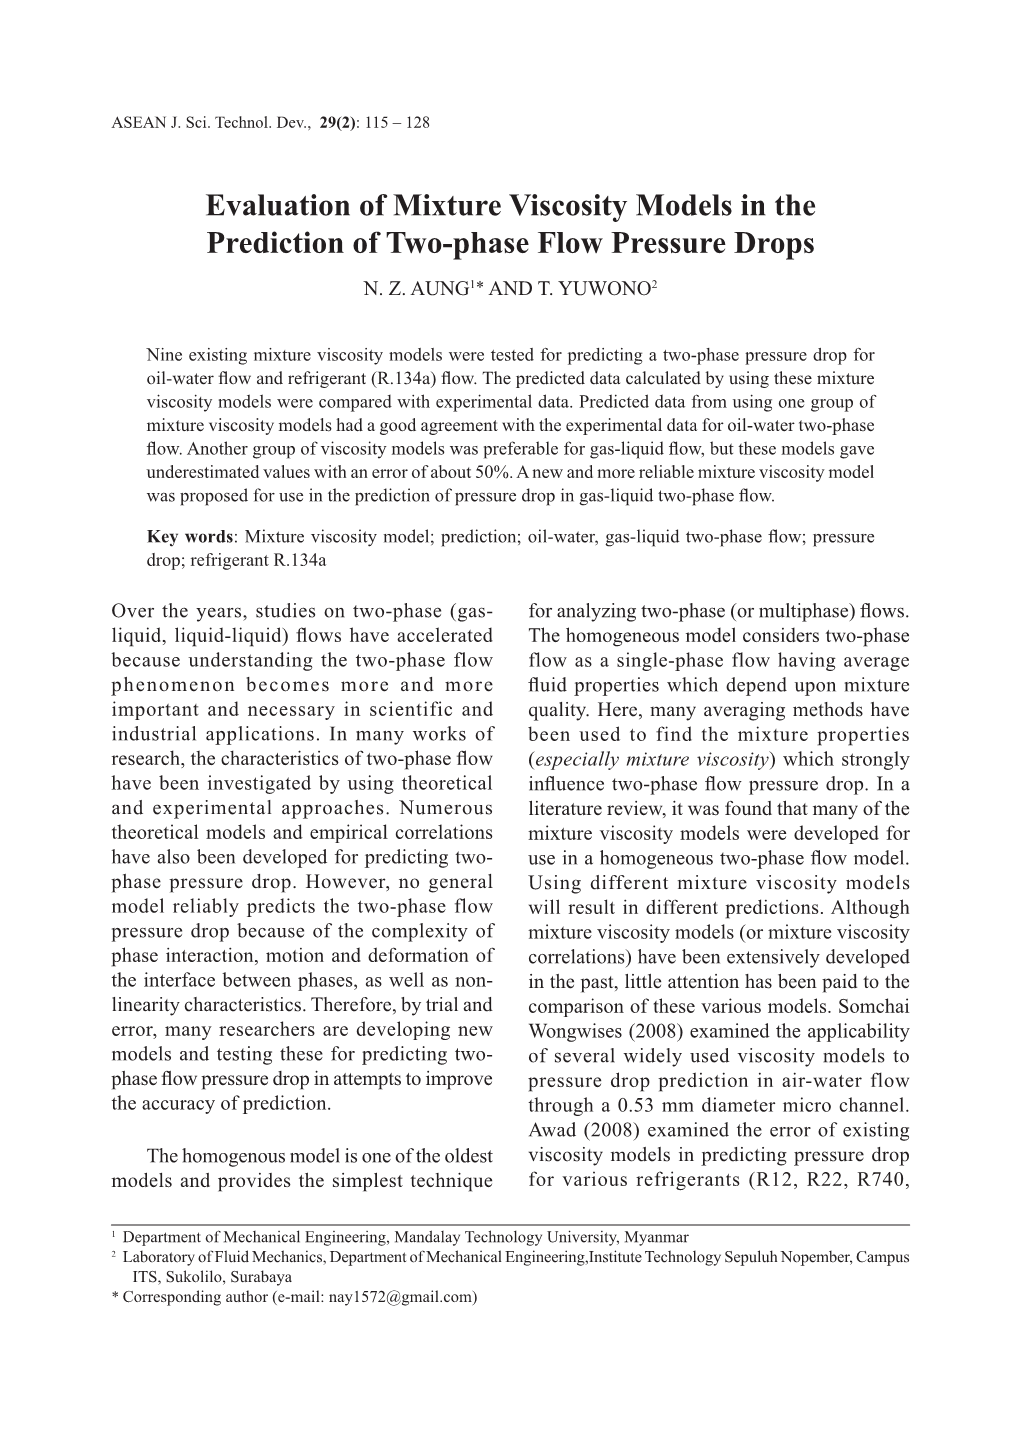 Evaluation of Mixture Viscosity Models in the Prediction of Two-Phase Flow Pressure Drops N